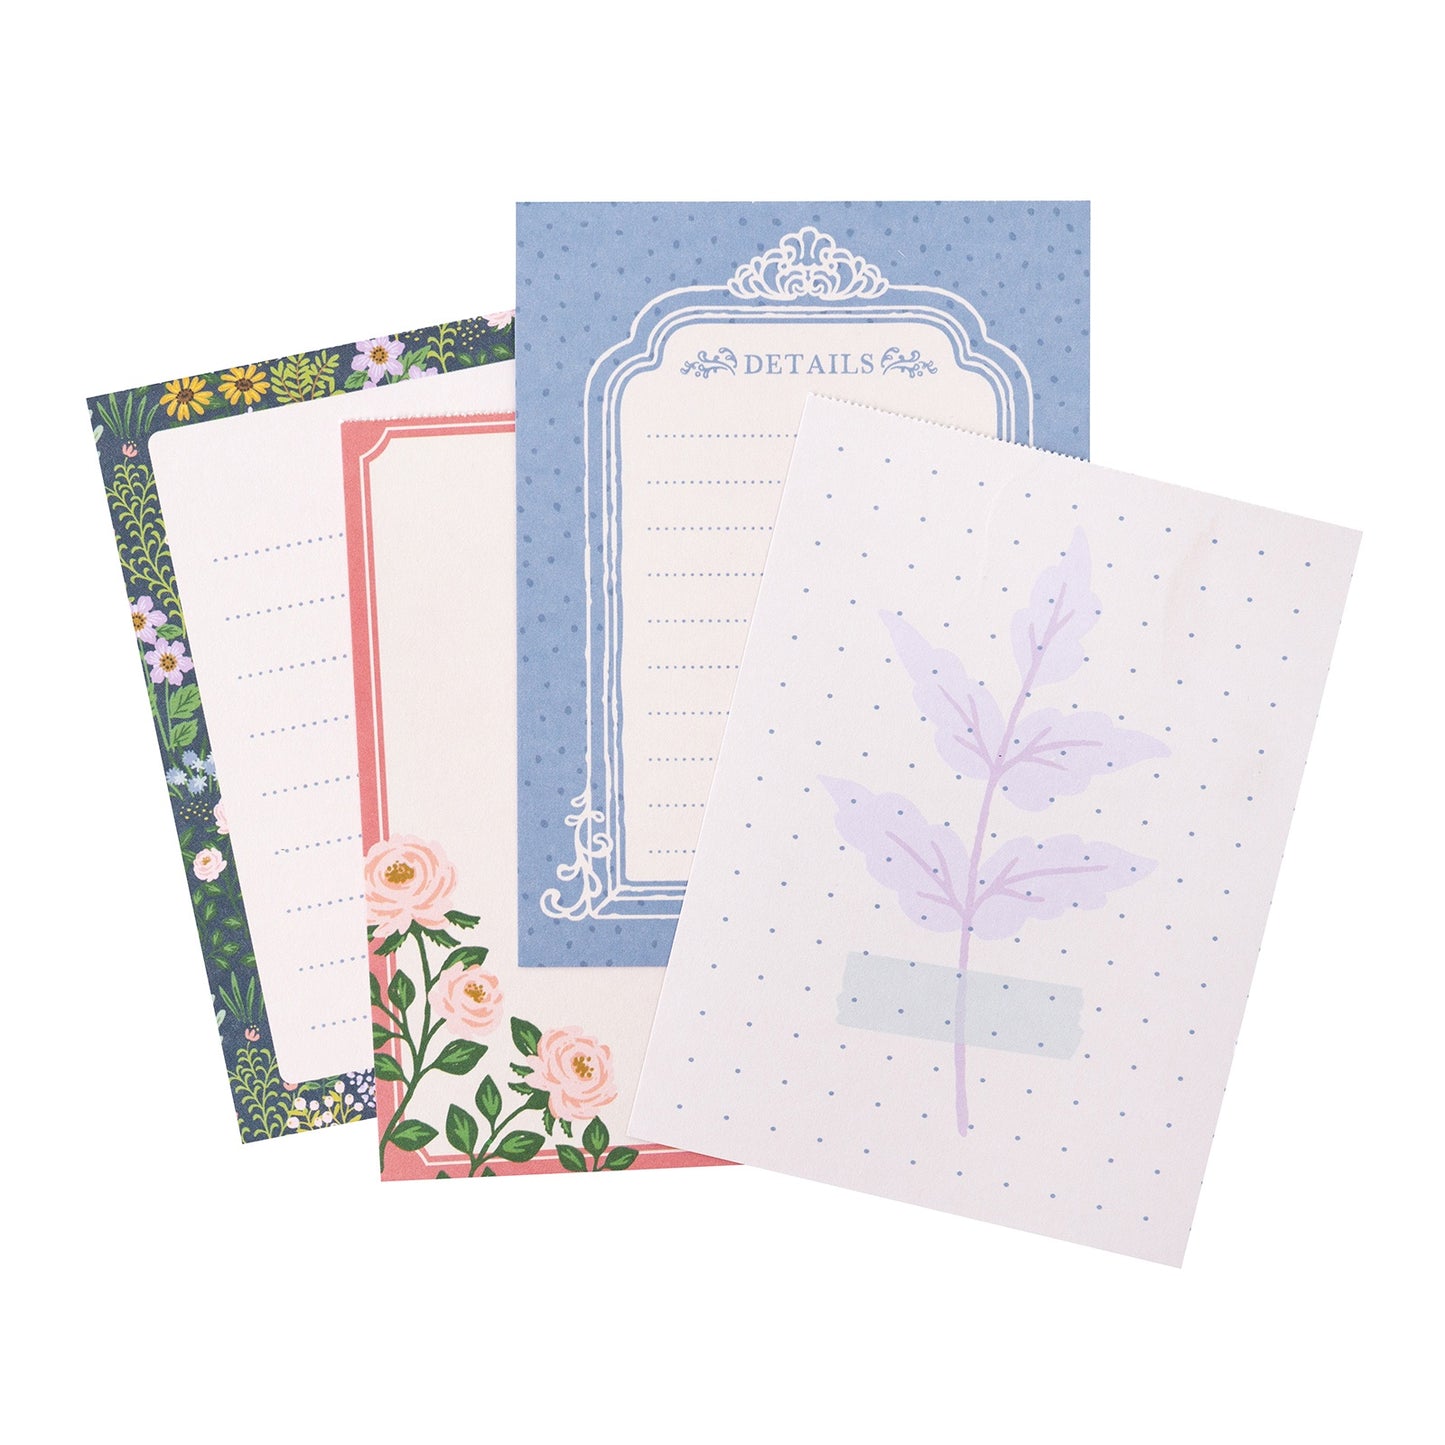 Maggie Holmes Woodland Grove Card Pad 3"X4" 40/Pkg-Journaling